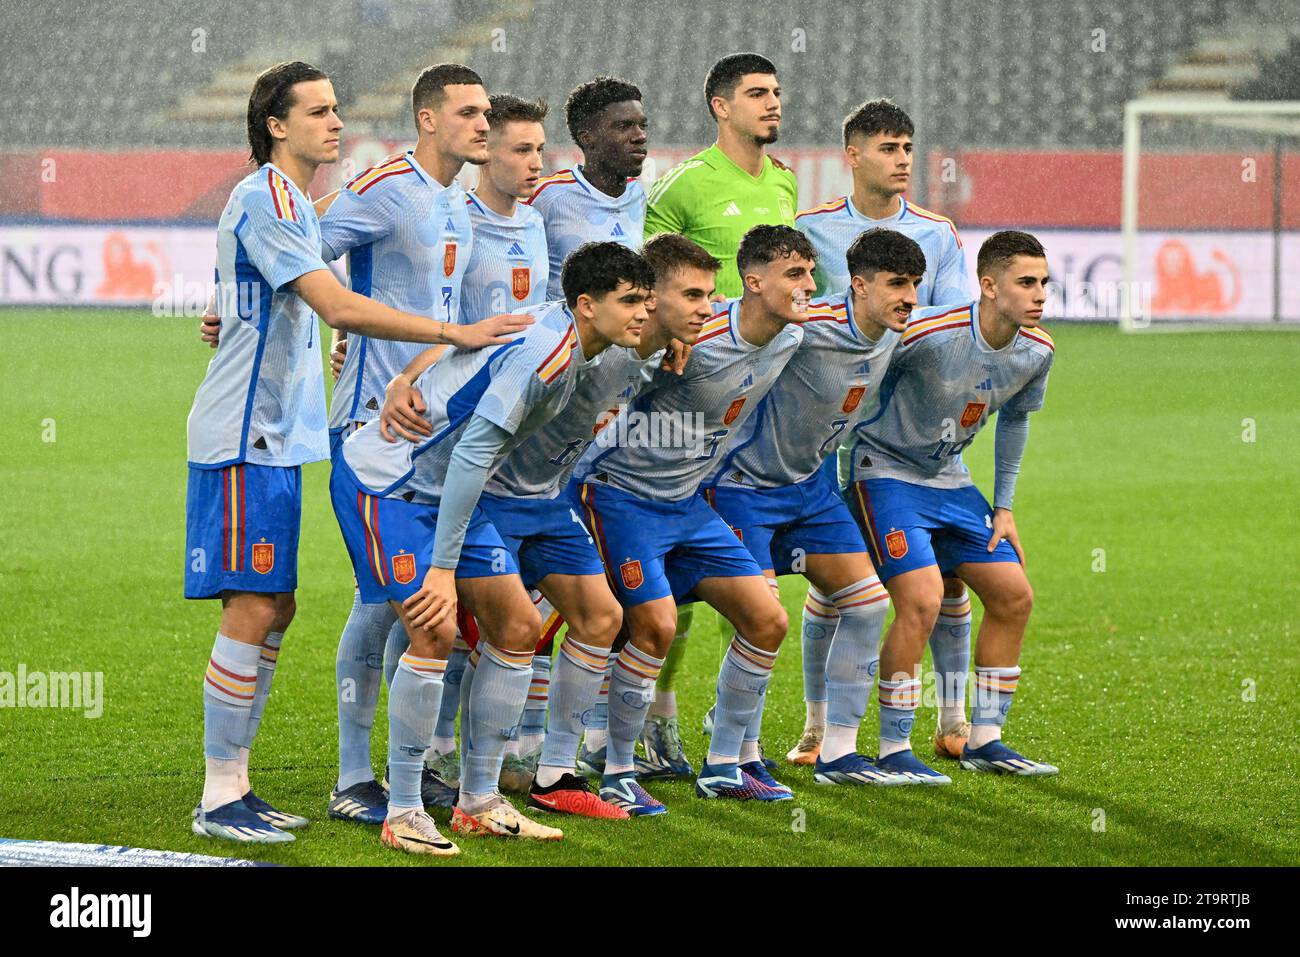 Leuven, Belgium. 21st Nov, 2023. players of Spain pose for a team photo during a soccer game between the Under 21 national teams of Belgium and Spain on the 5 th matchday in group B in the qualifying of the EUFA Under 21 Championship, on Tuesday 21 November 2023 in Leuven, Belgium .(Photo by David Catry/Isosport) Credit: sportpix/Alamy Live News Stock Photo